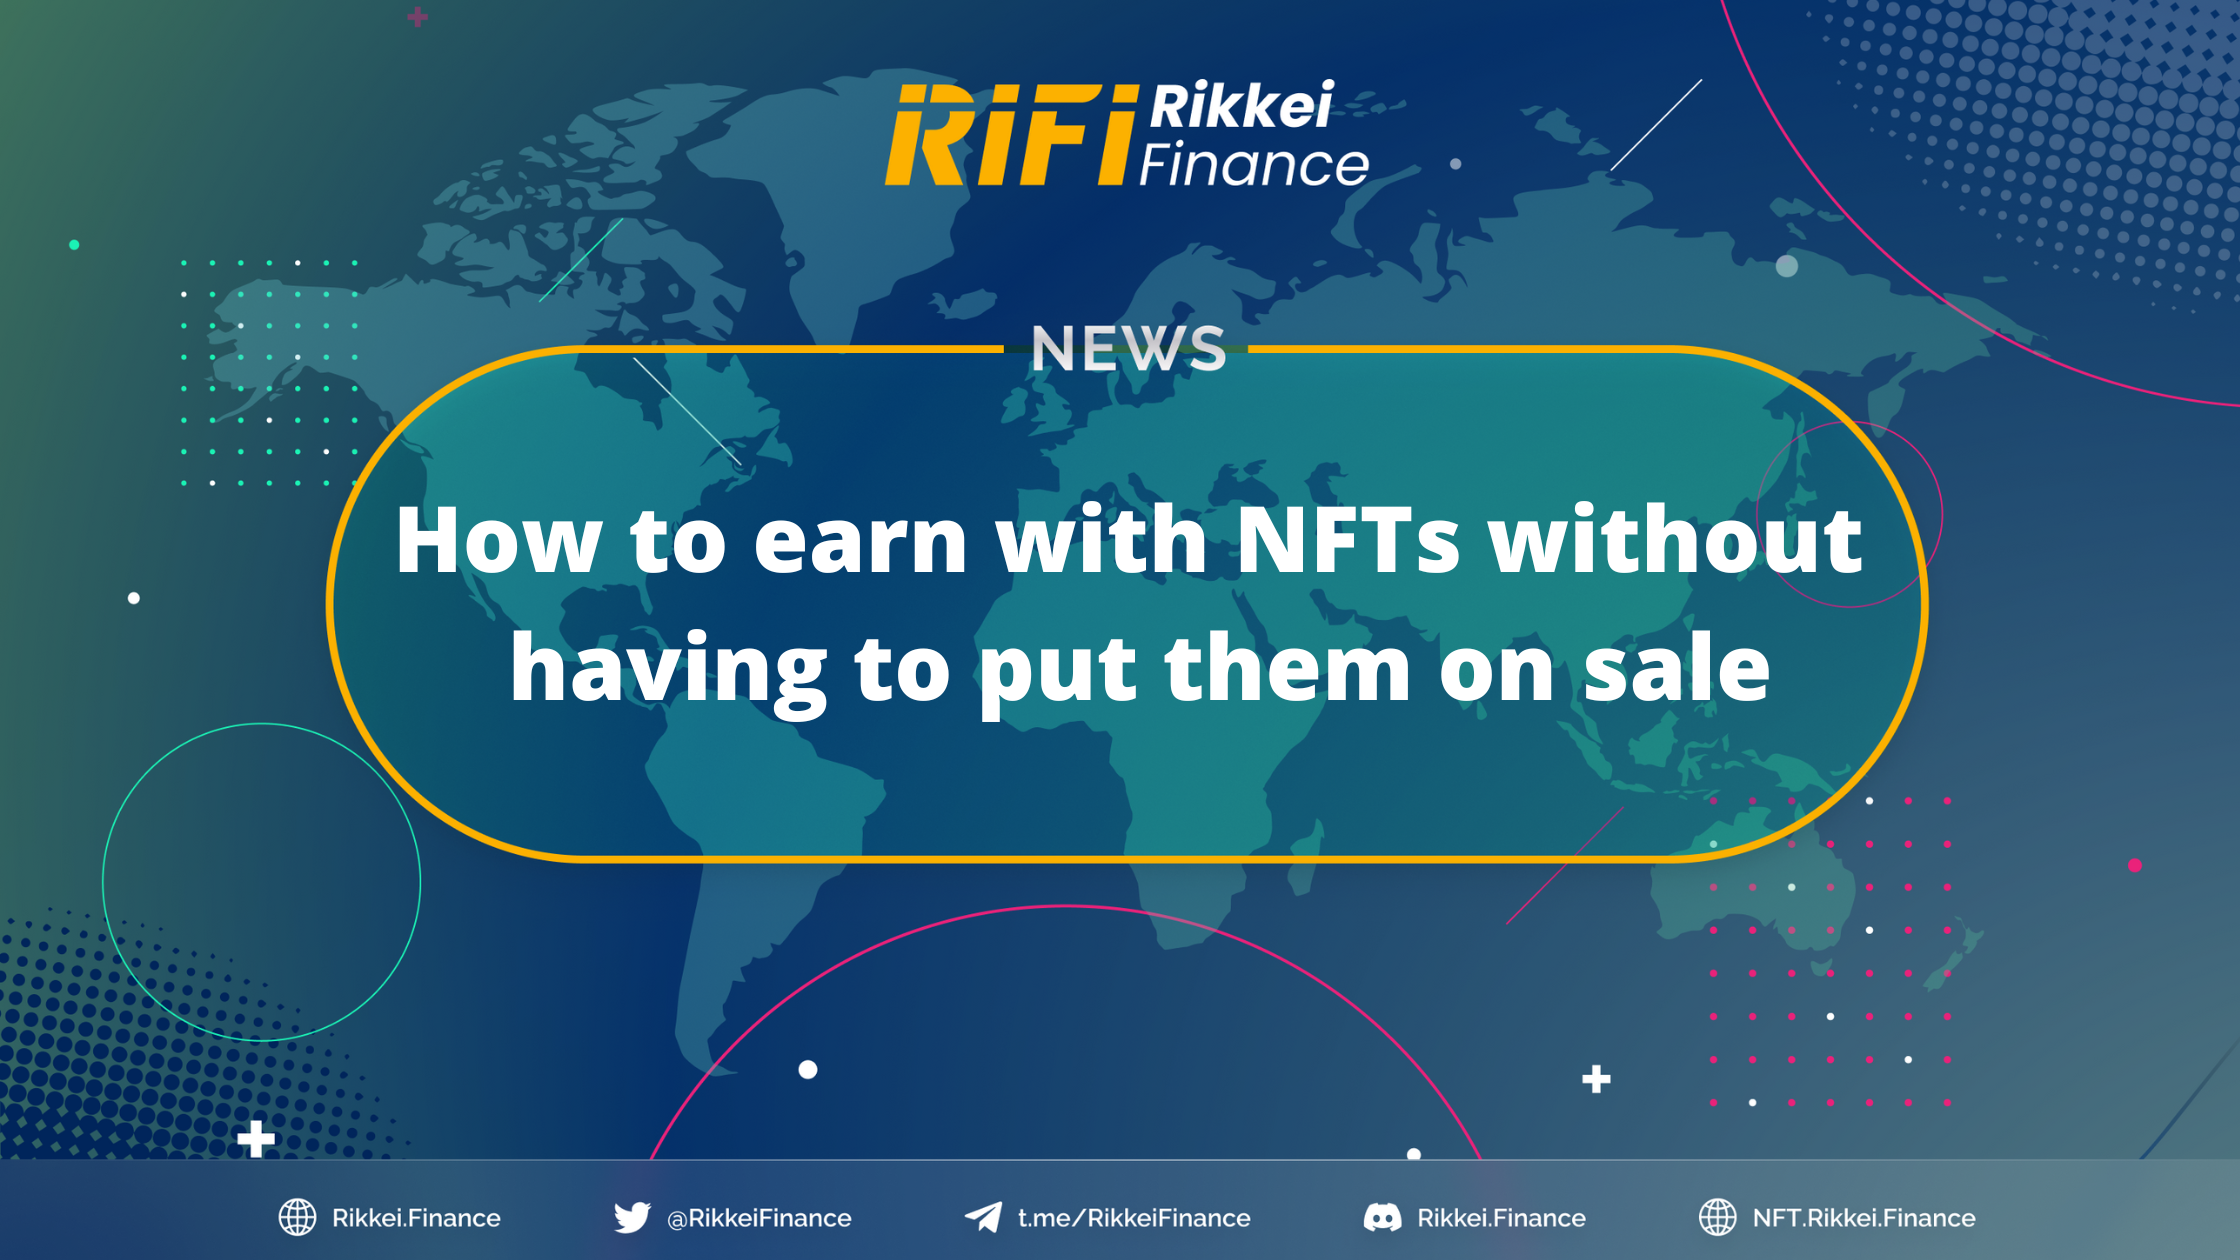 How to earn with NFTs without having to put them on sale